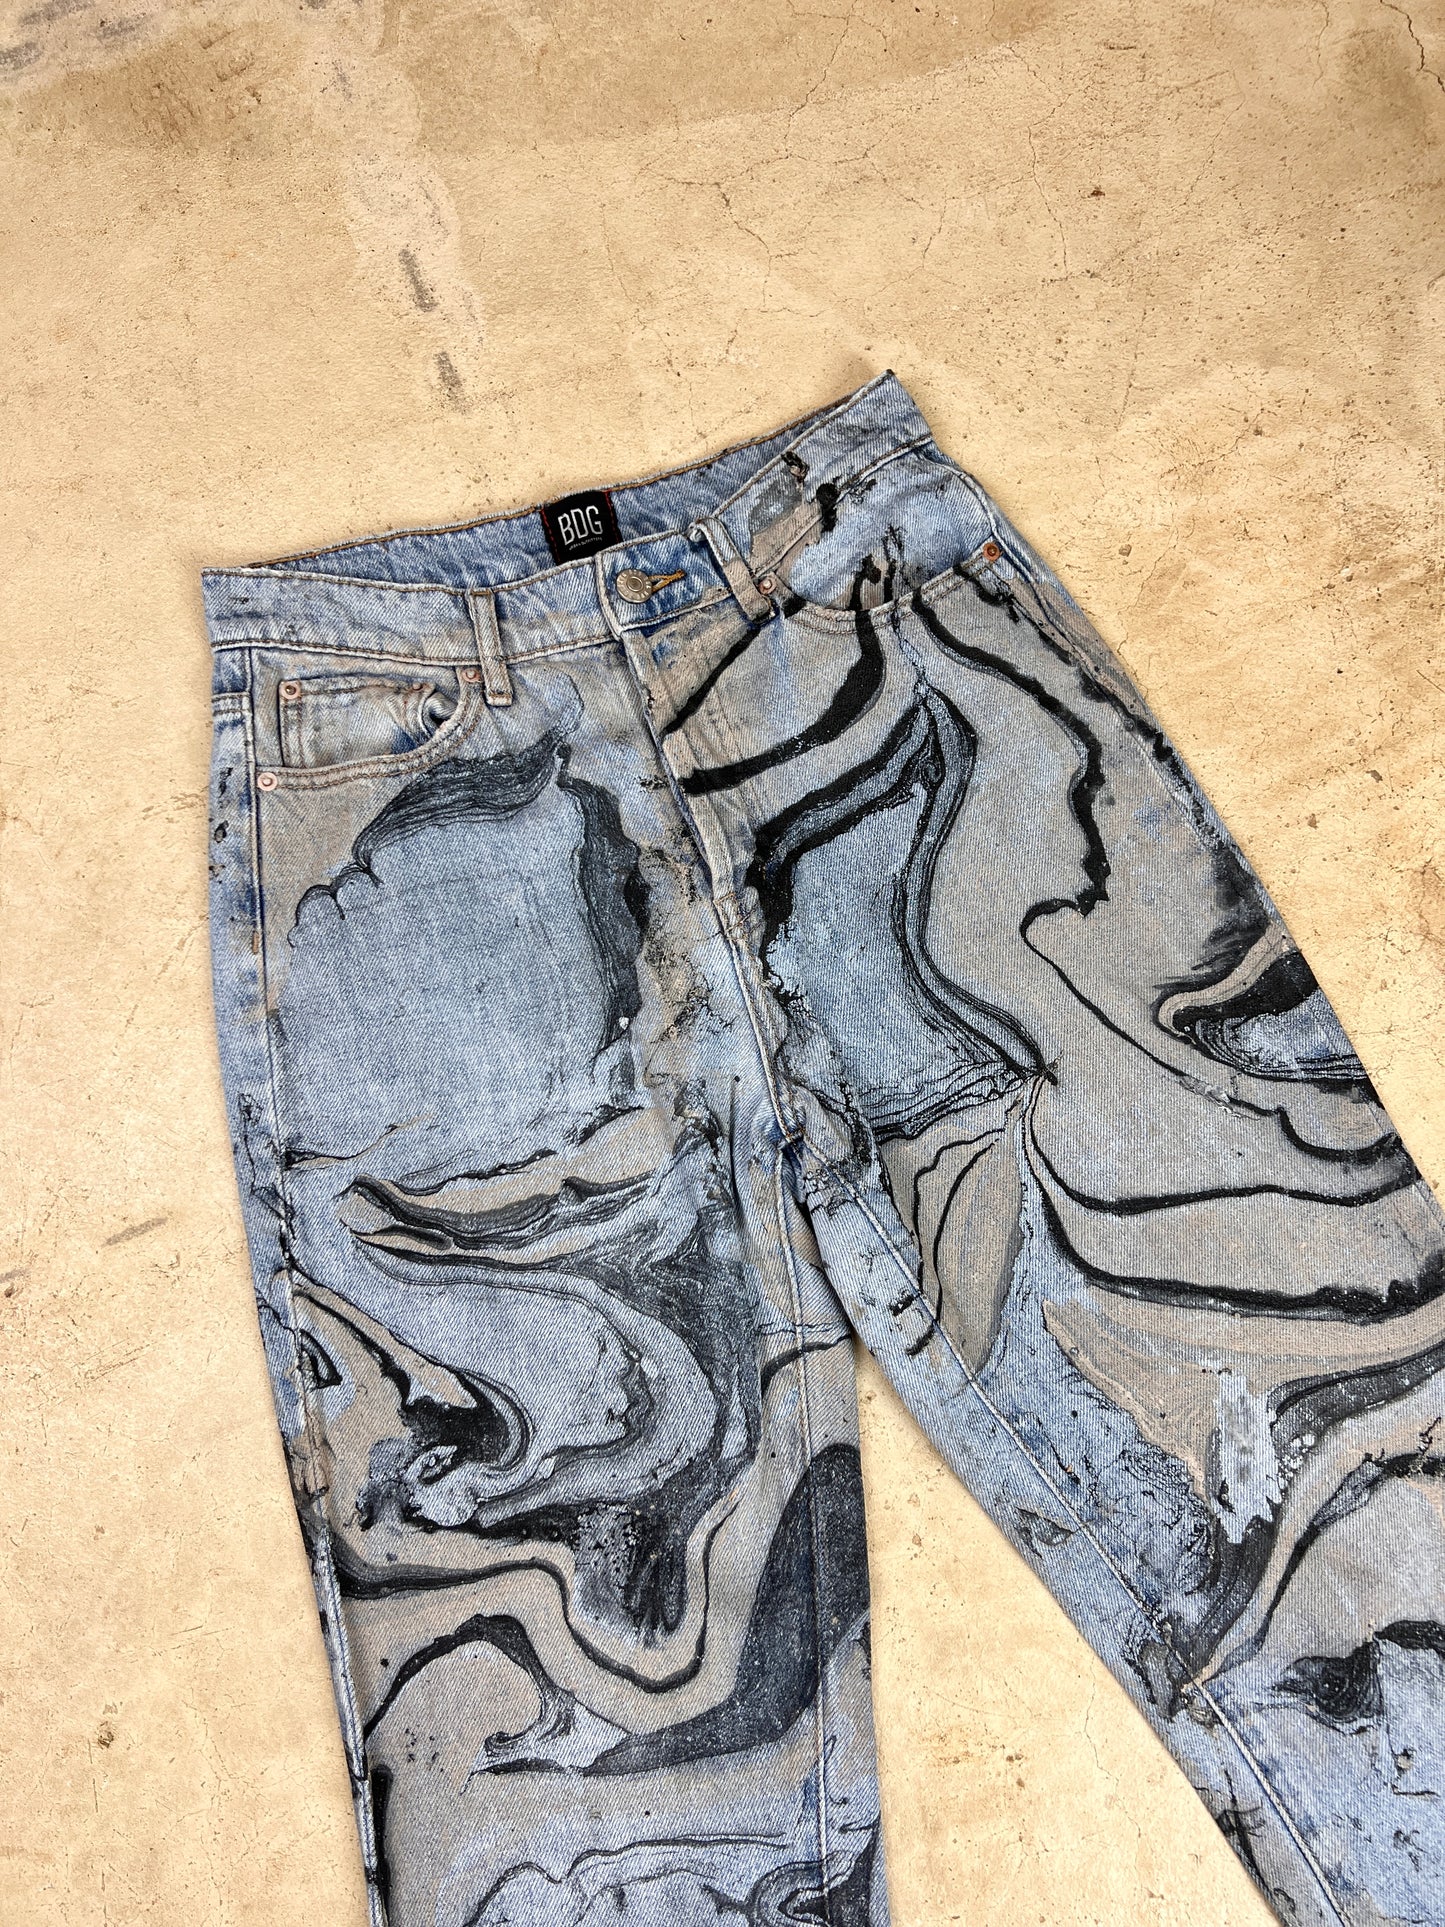 The Marbled Slim Straight Leg Jeans - 26"